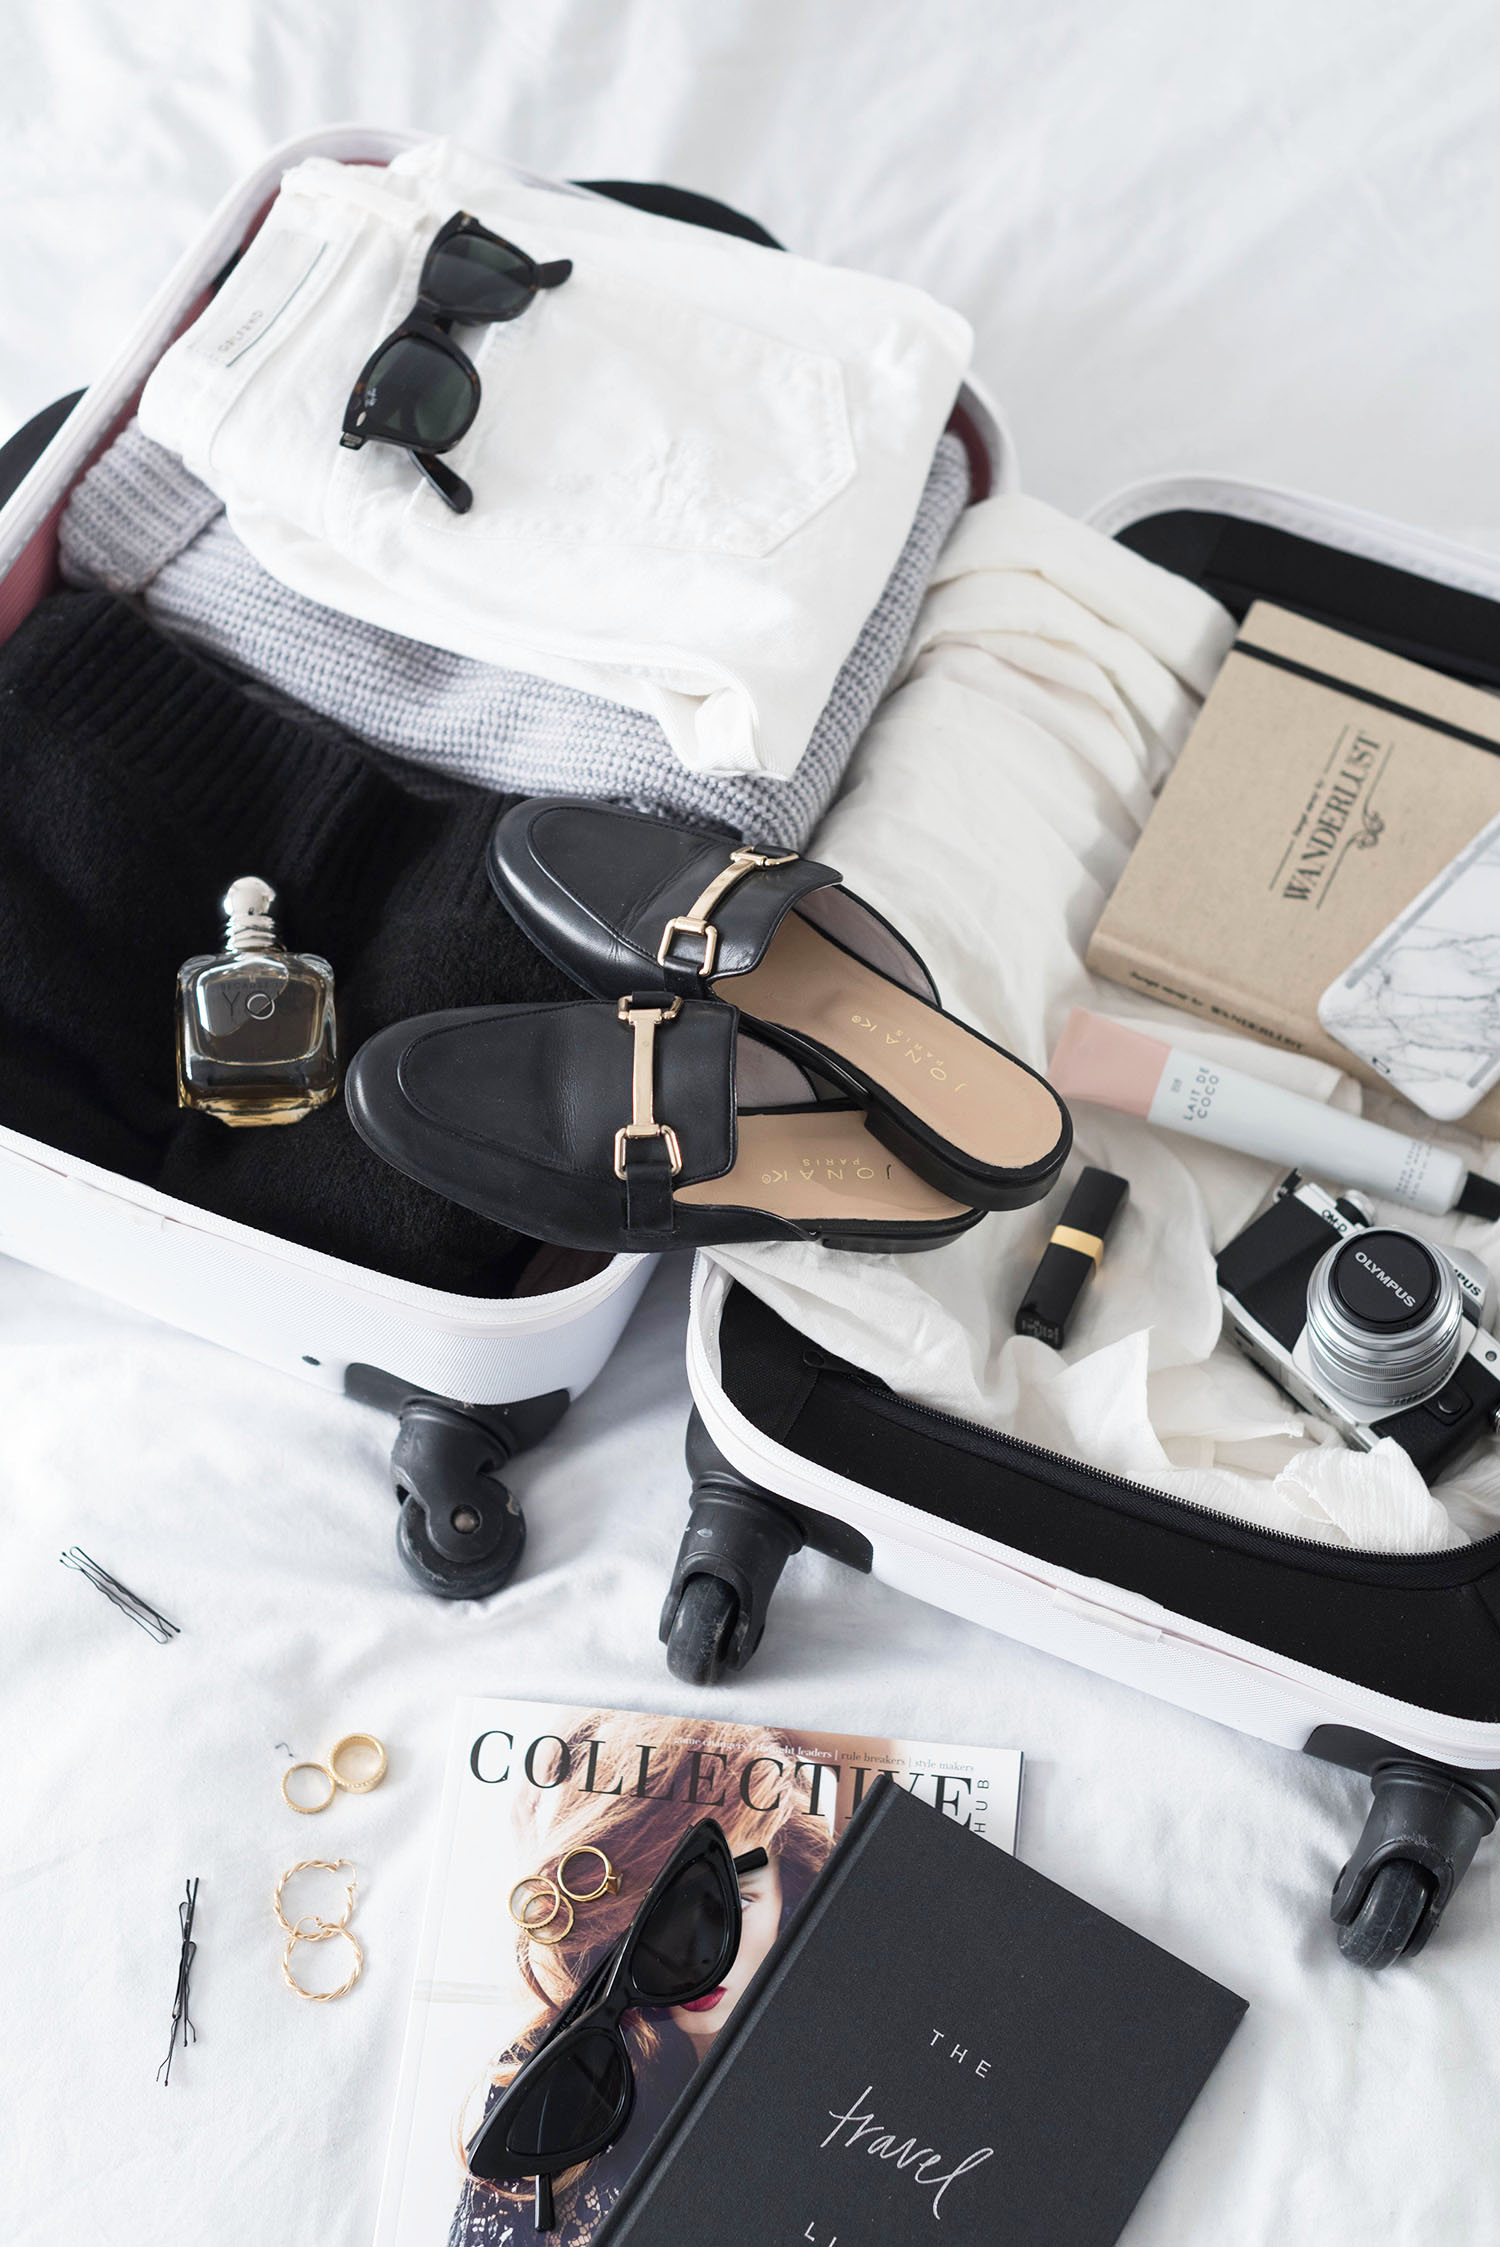 Fashion blogger Cee Fardoe of Coco & Vera reveals her open Herschel carry-on suitcase, which old Jonak mules, an Olympus camera and more